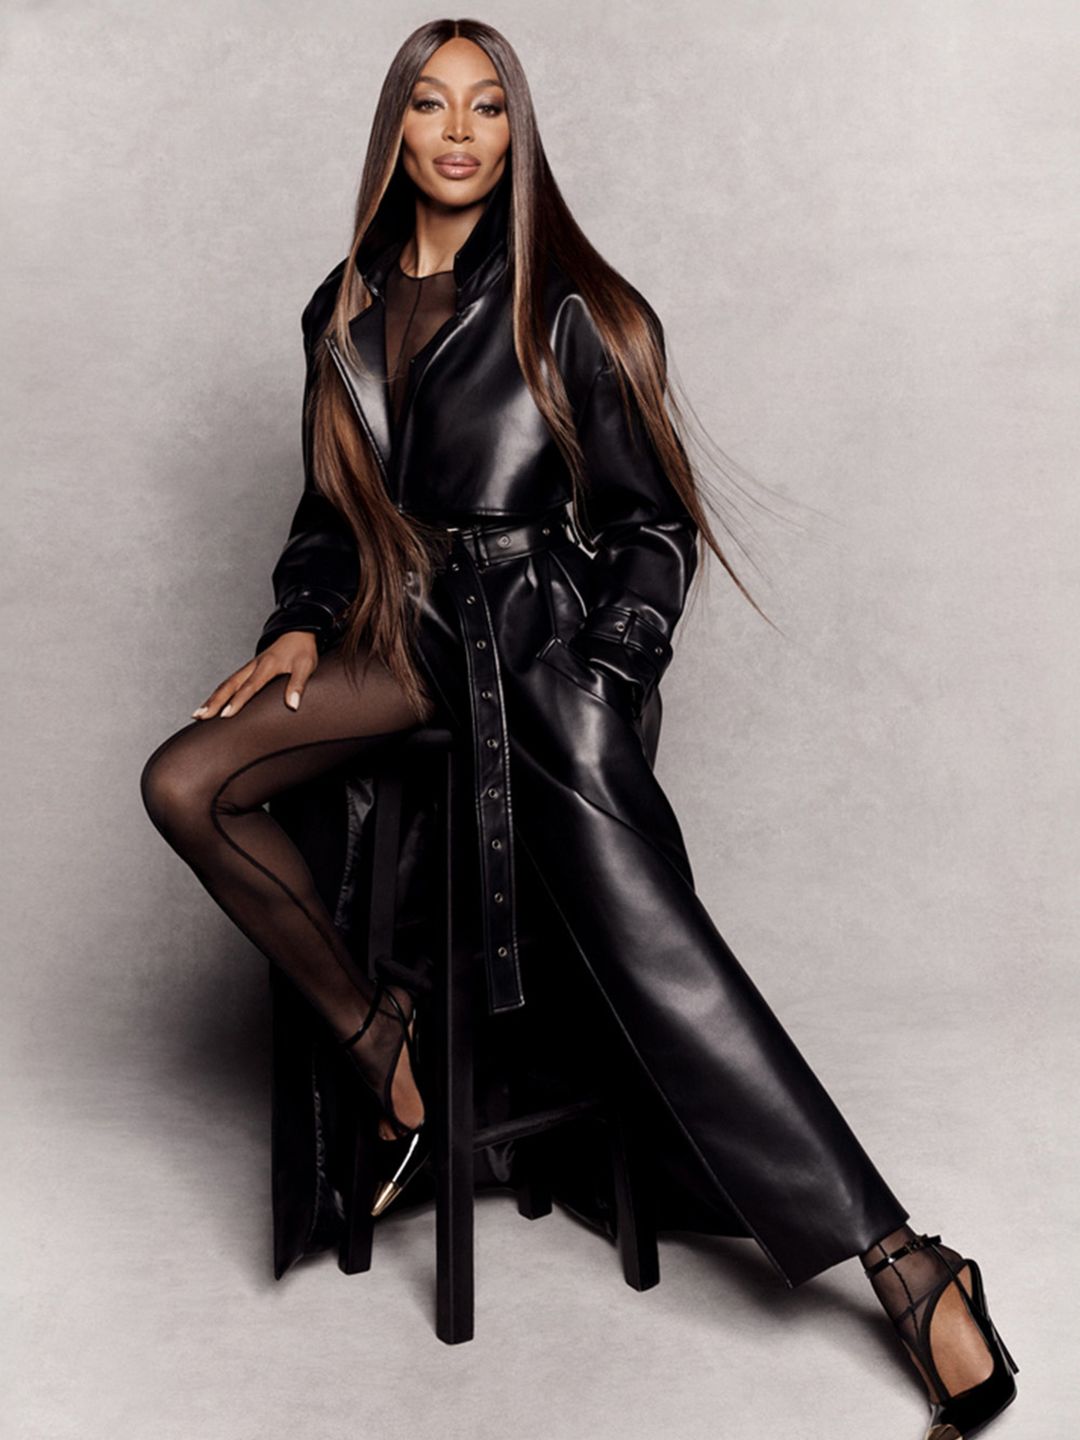 Naomi Campbell in a leather maxi coat for her Pretty Little Thing collection 